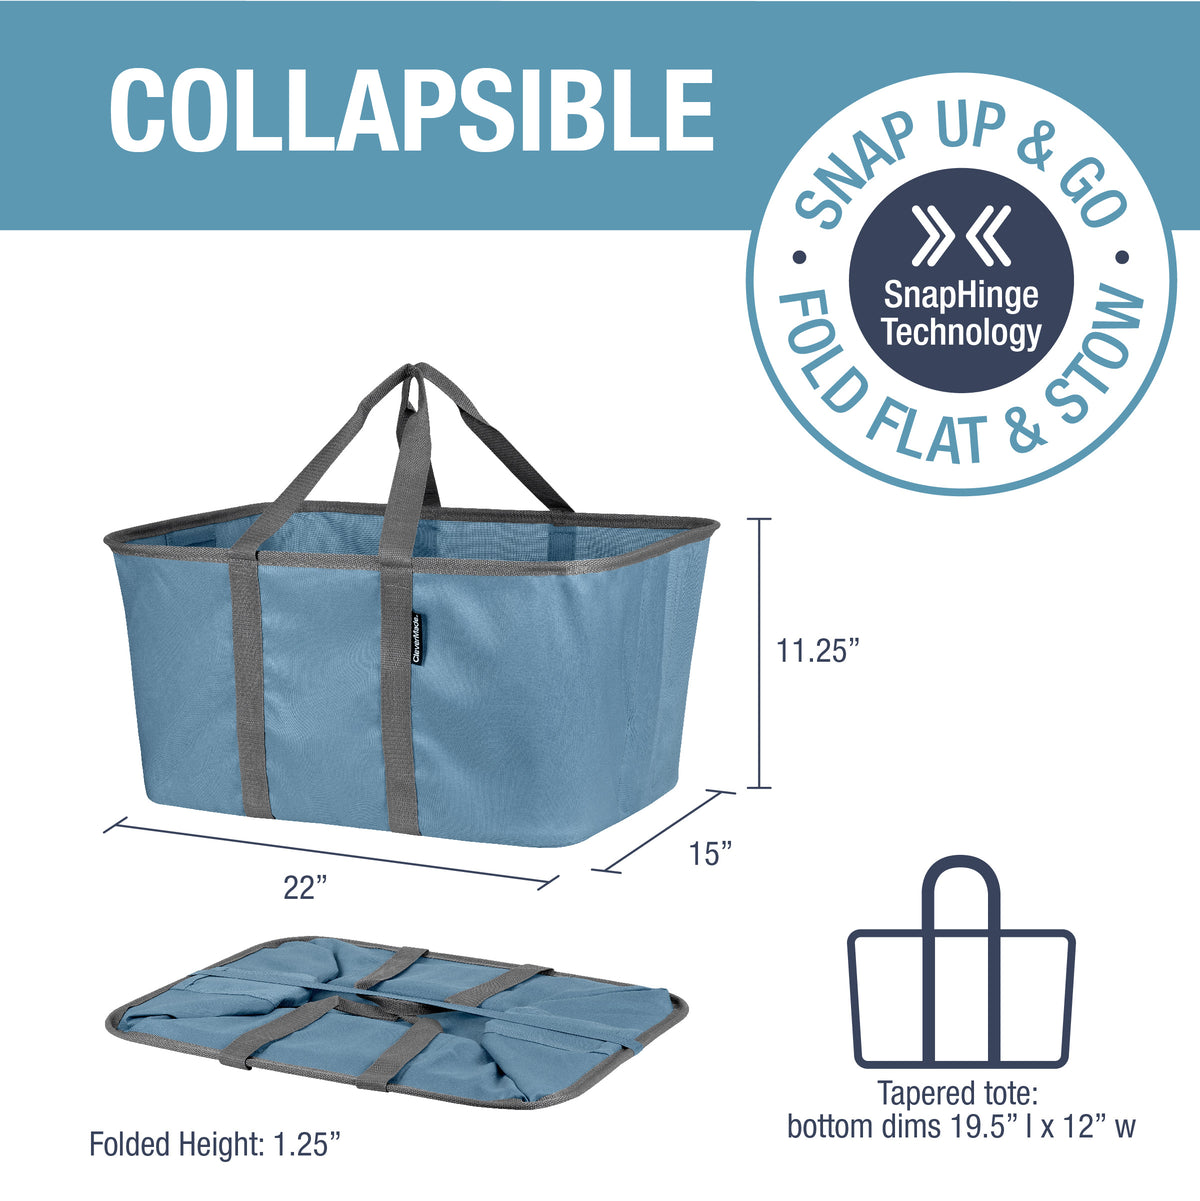 CleverMade 2-pack Collapsible Laundry Basket Tote